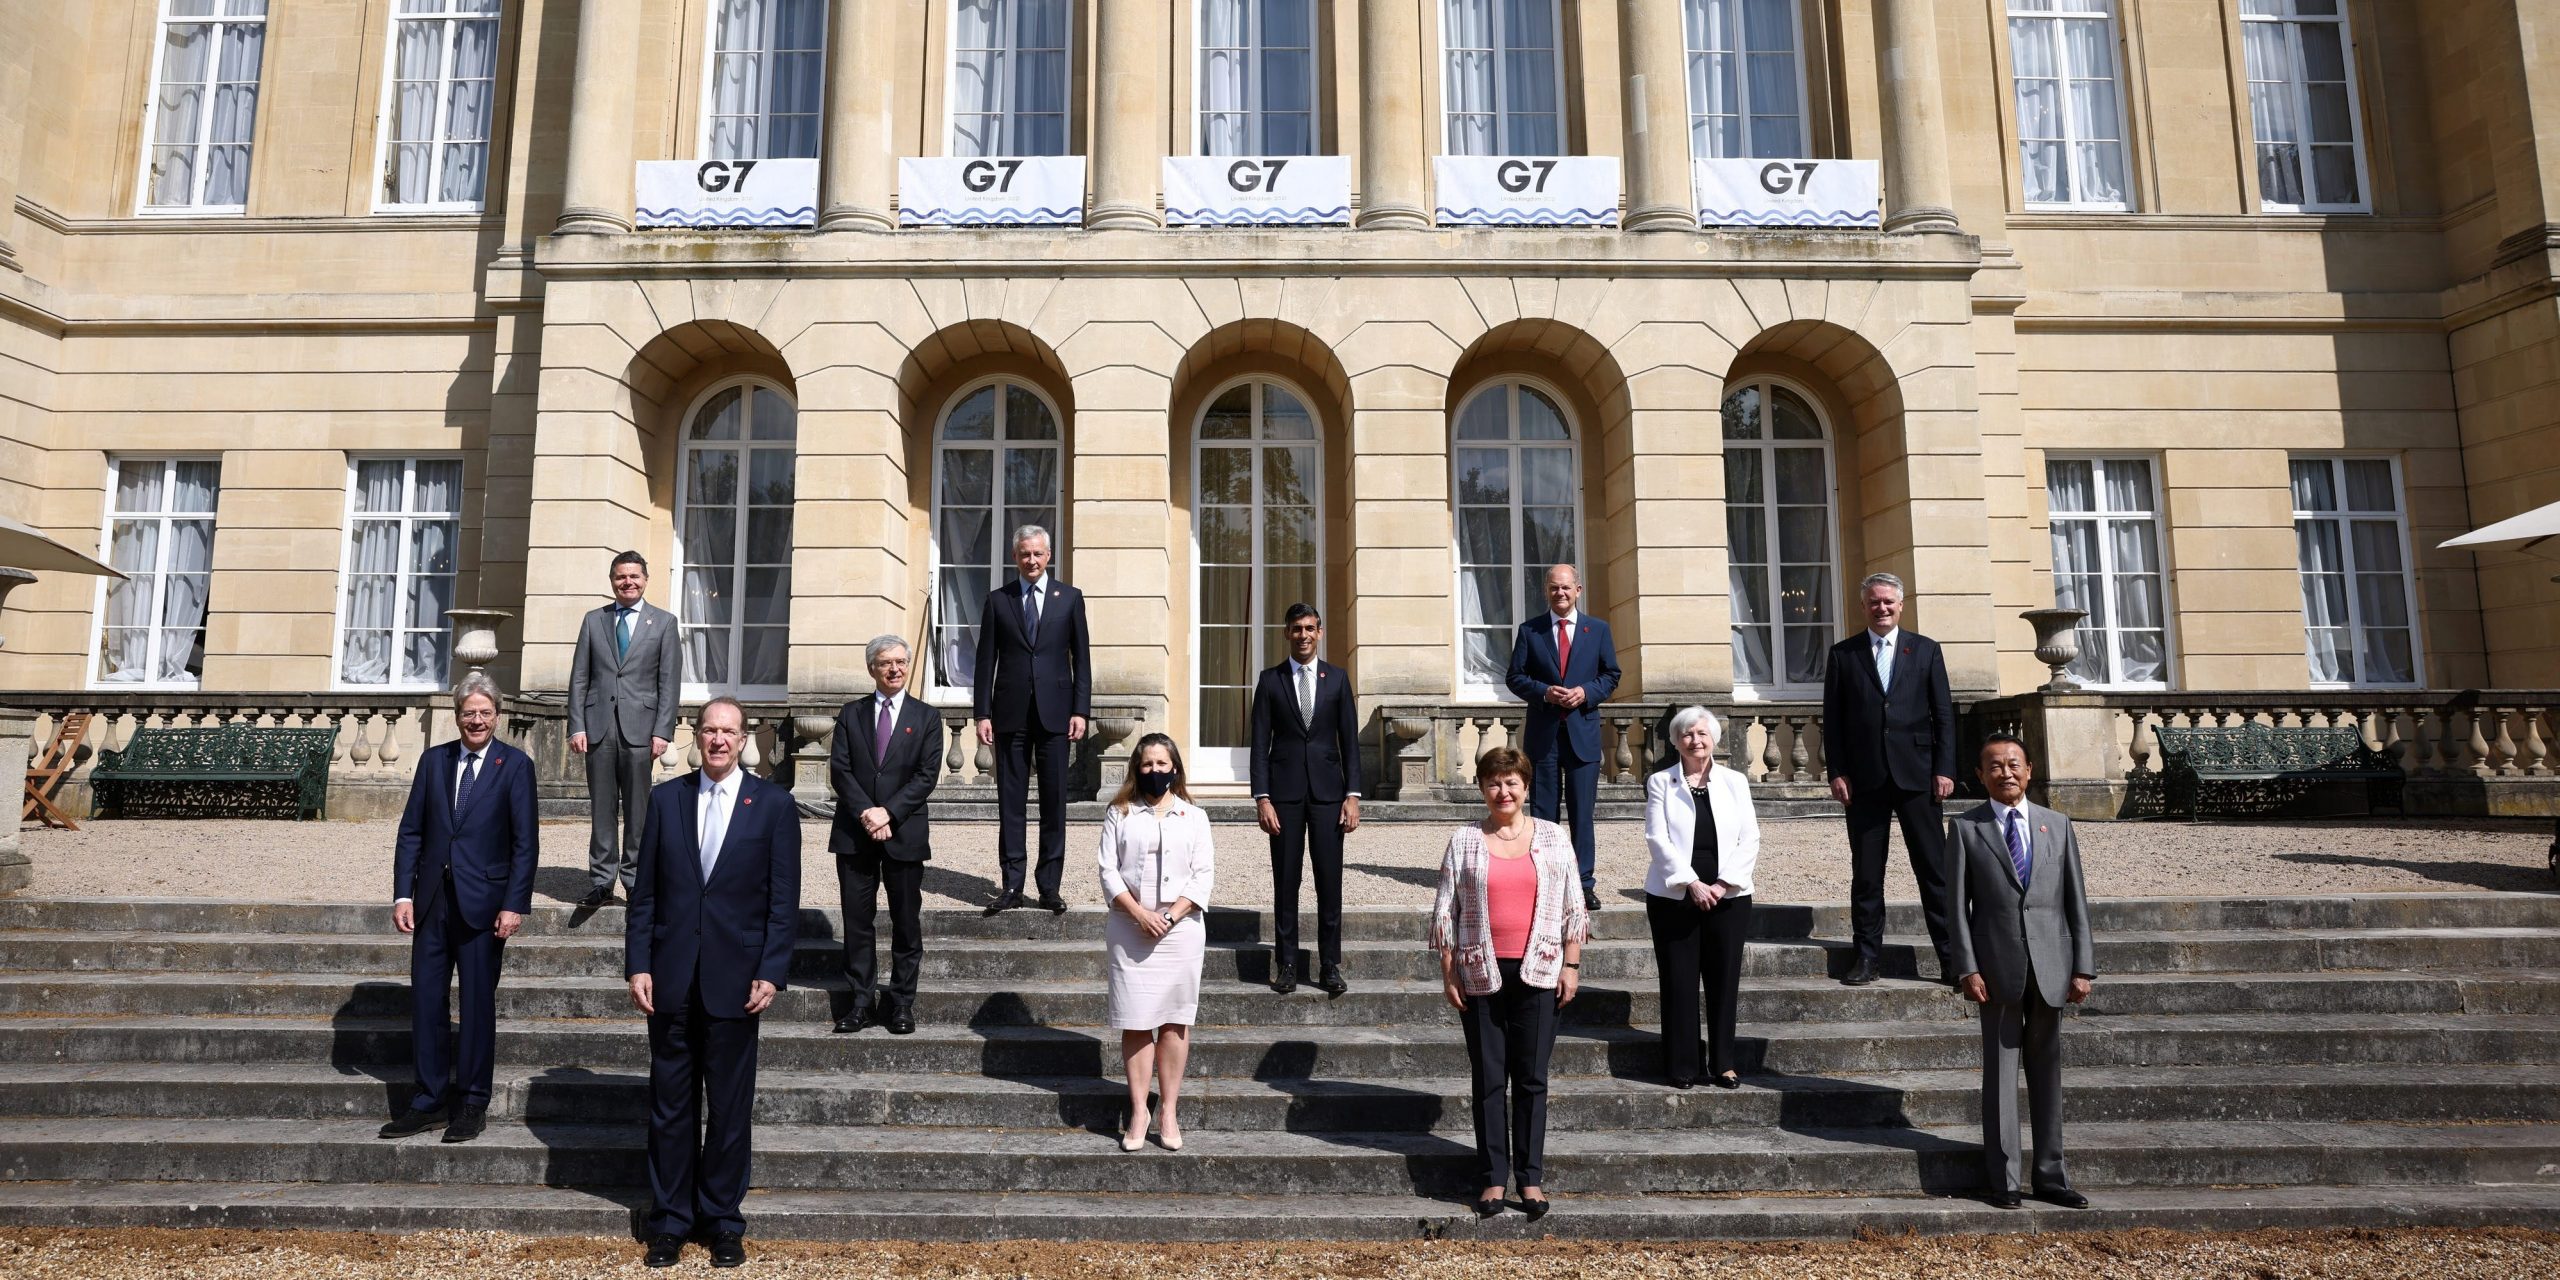 G7 Finance Ministers